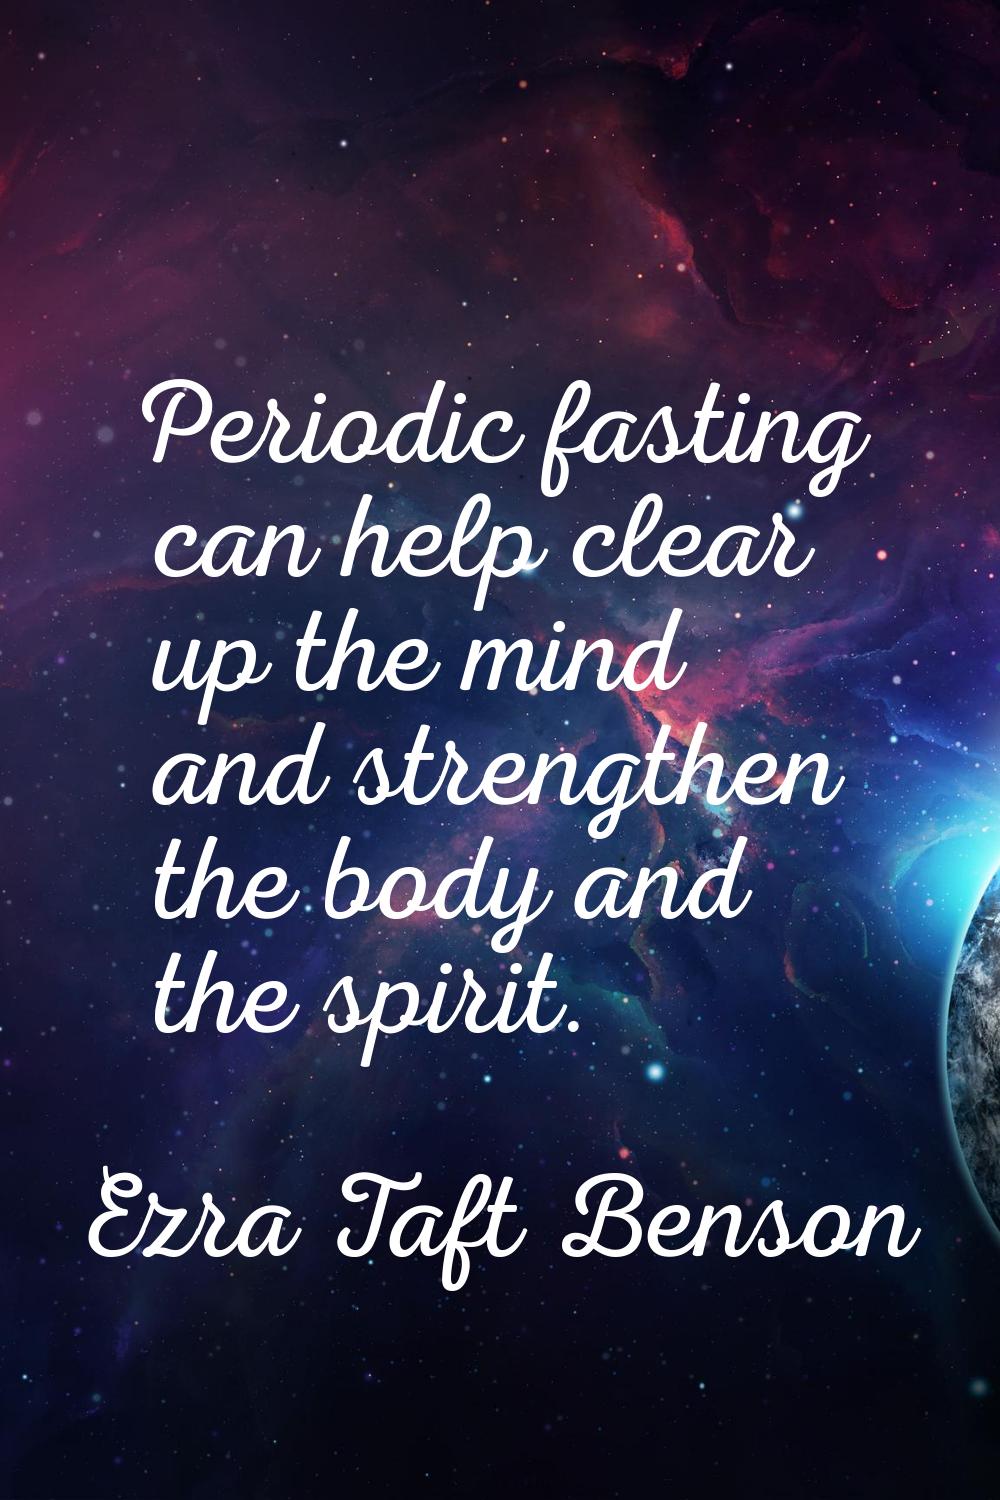 Periodic fasting can help clear up the mind and strengthen the body and the spirit.